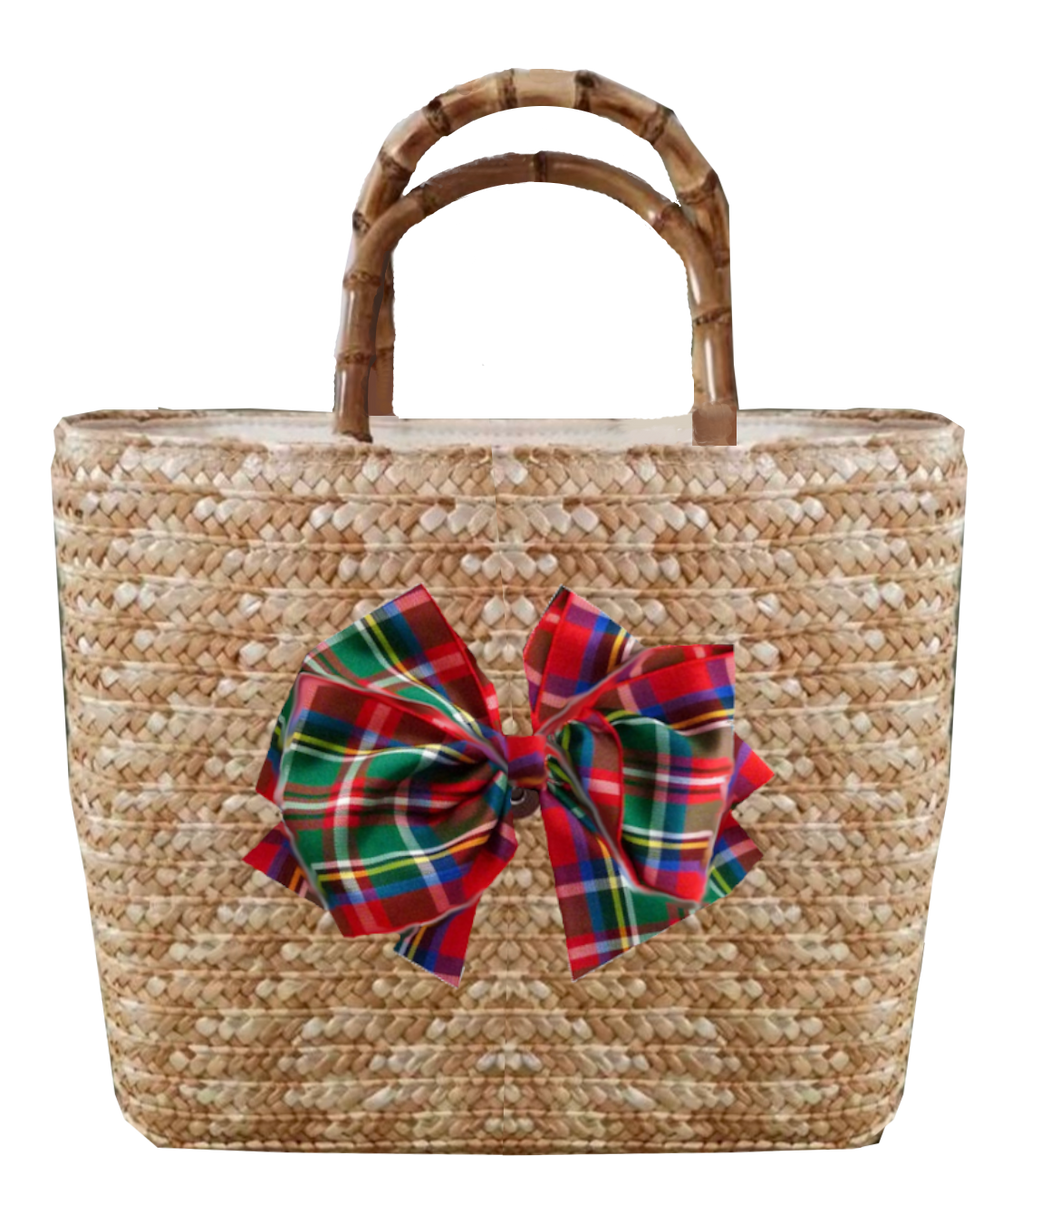 Sankaty Straw Tote with Interchangeable Bow - Red Tartan Plaid